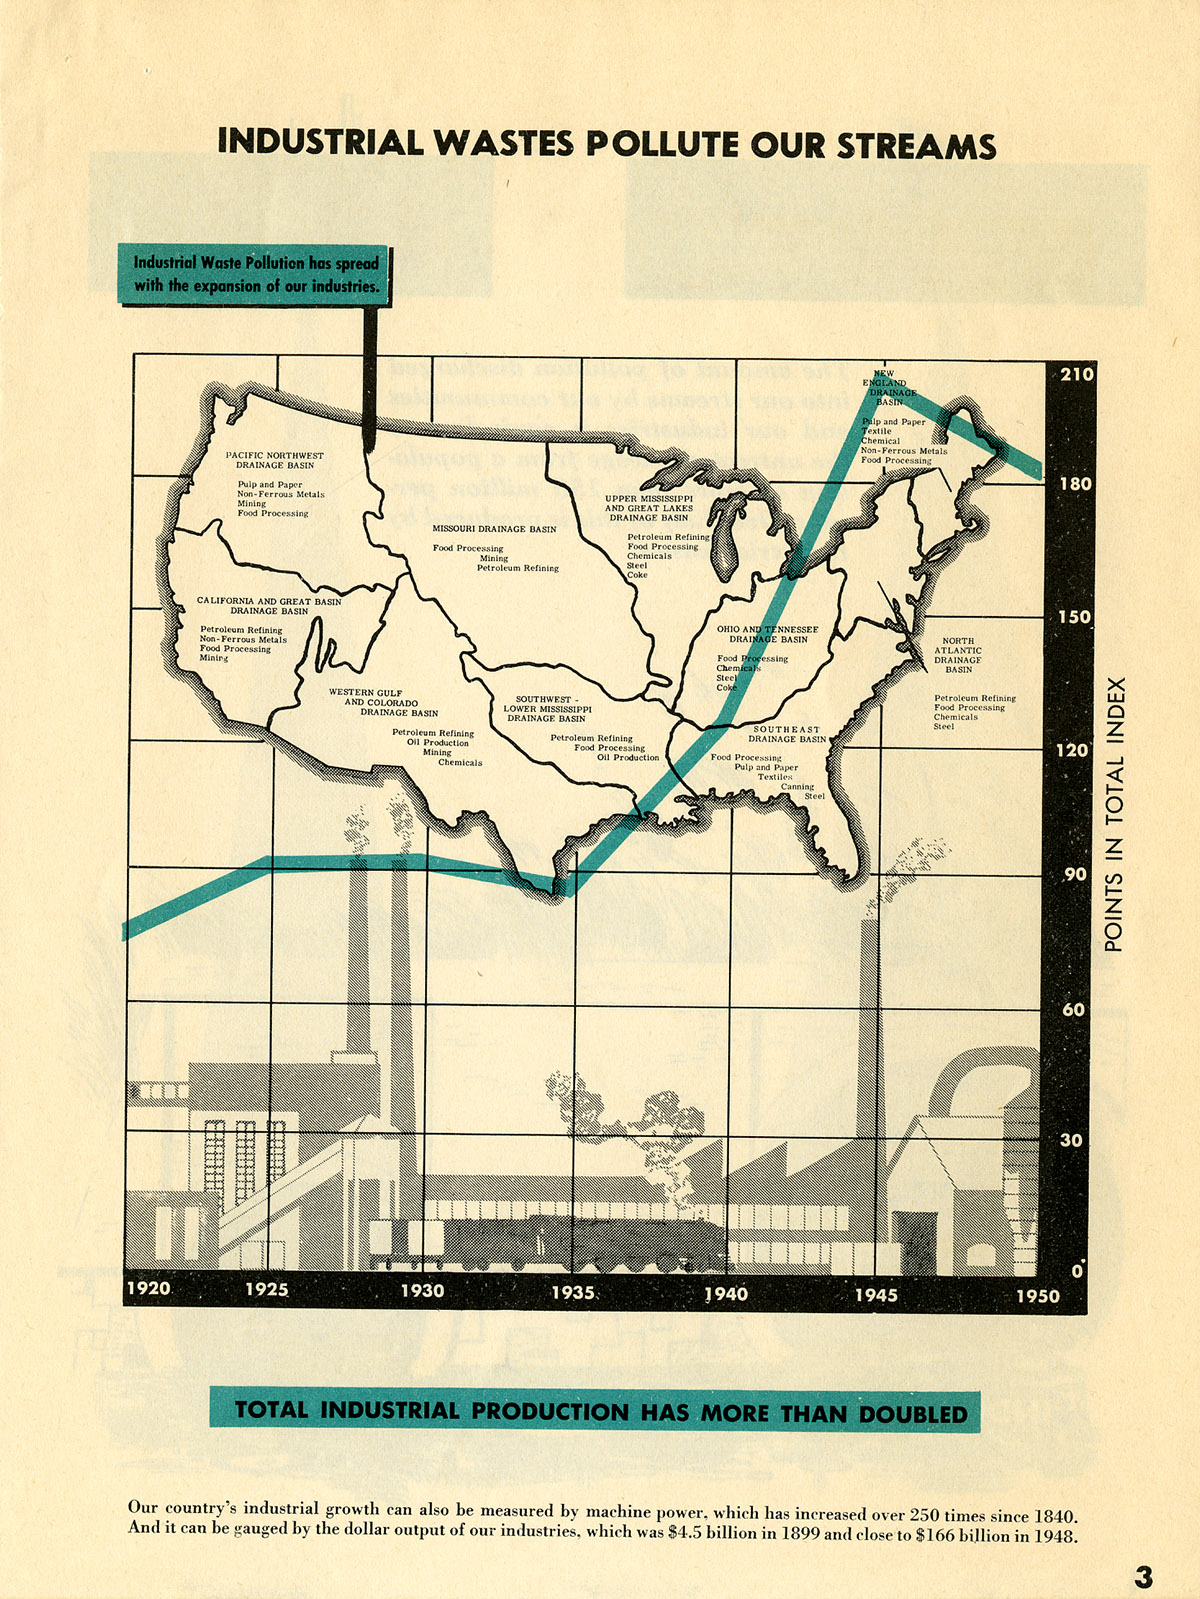 A page from a book with a graph and illustrations of an industrial landscape and the map of the United States.